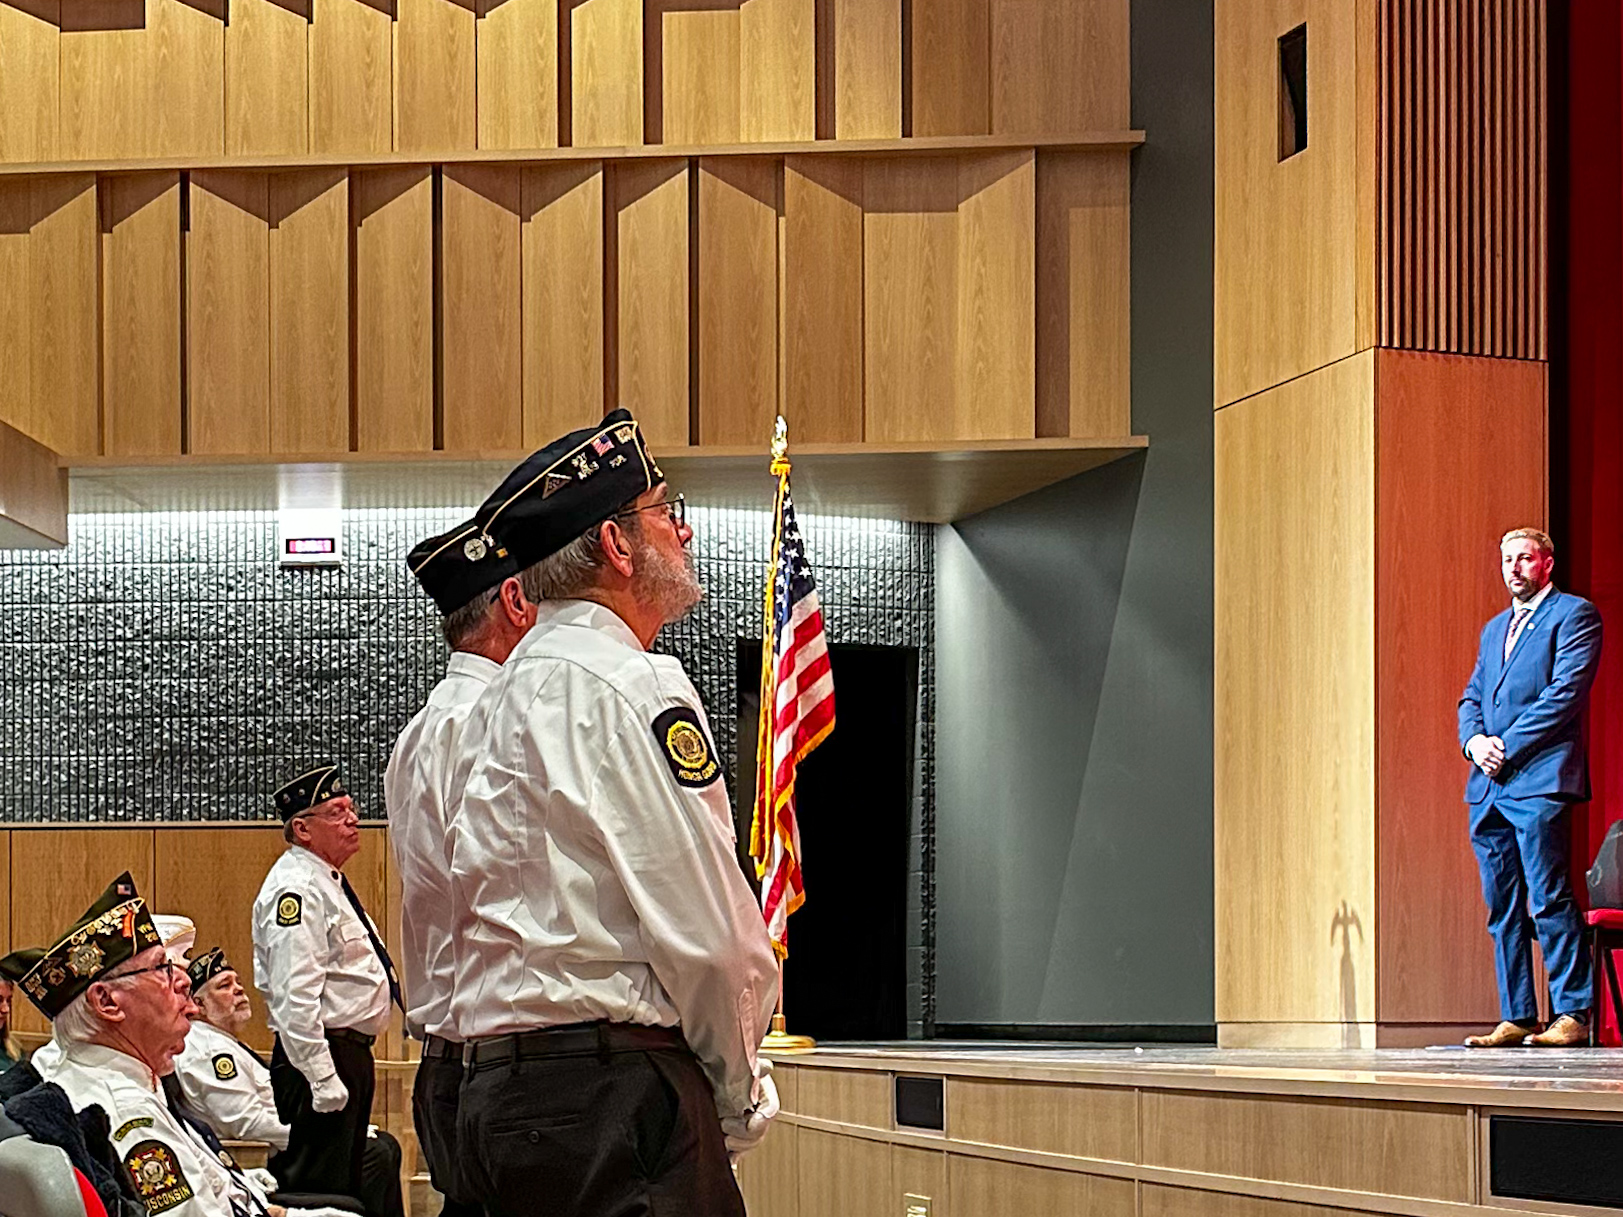 Veterans Standing to be Honored